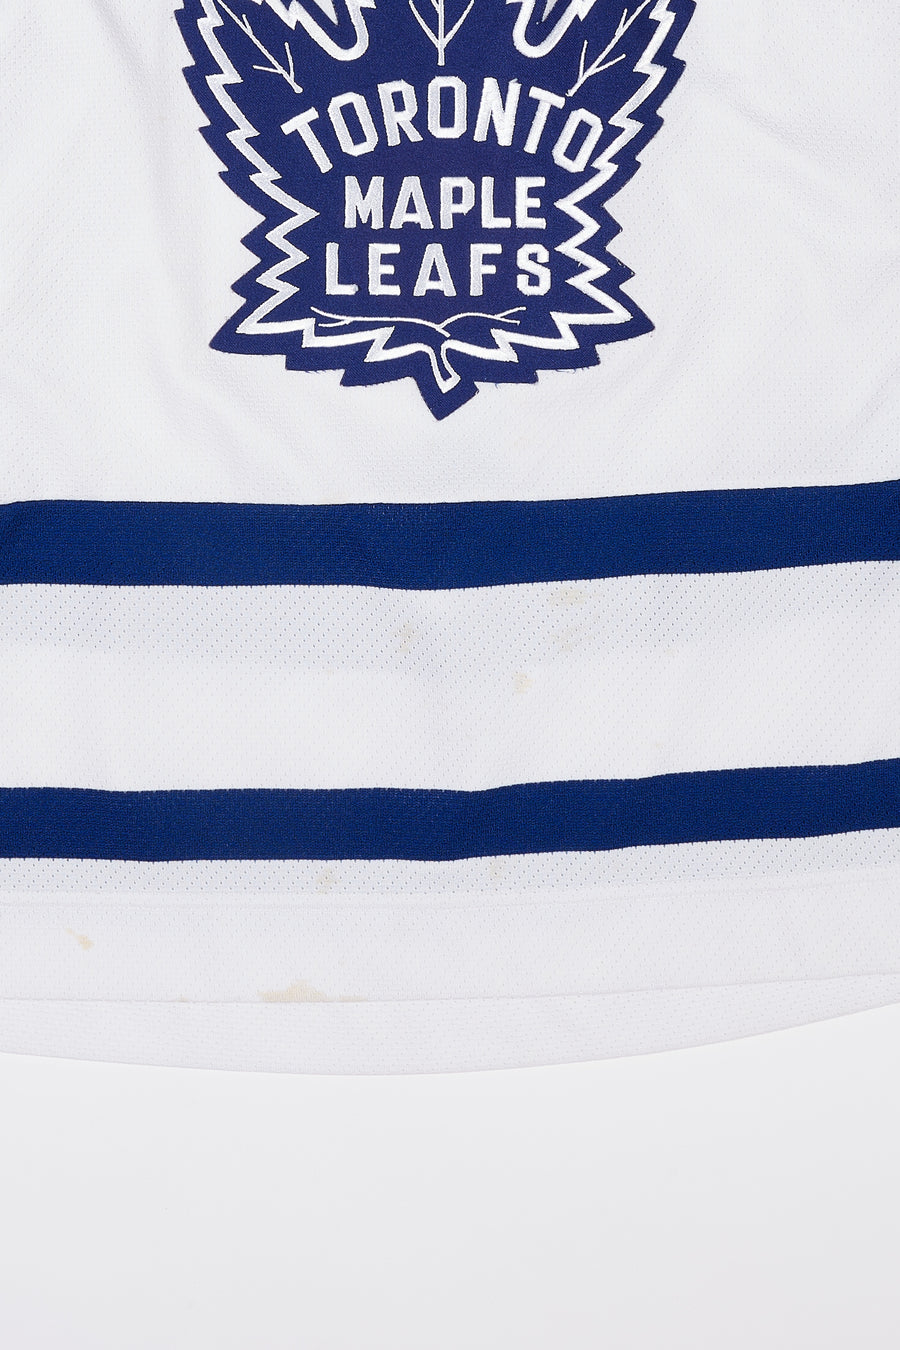 Vintage Toronto Maple Leafs CCM Hockey Jersey in a vintage style from thrift store Twise Studio